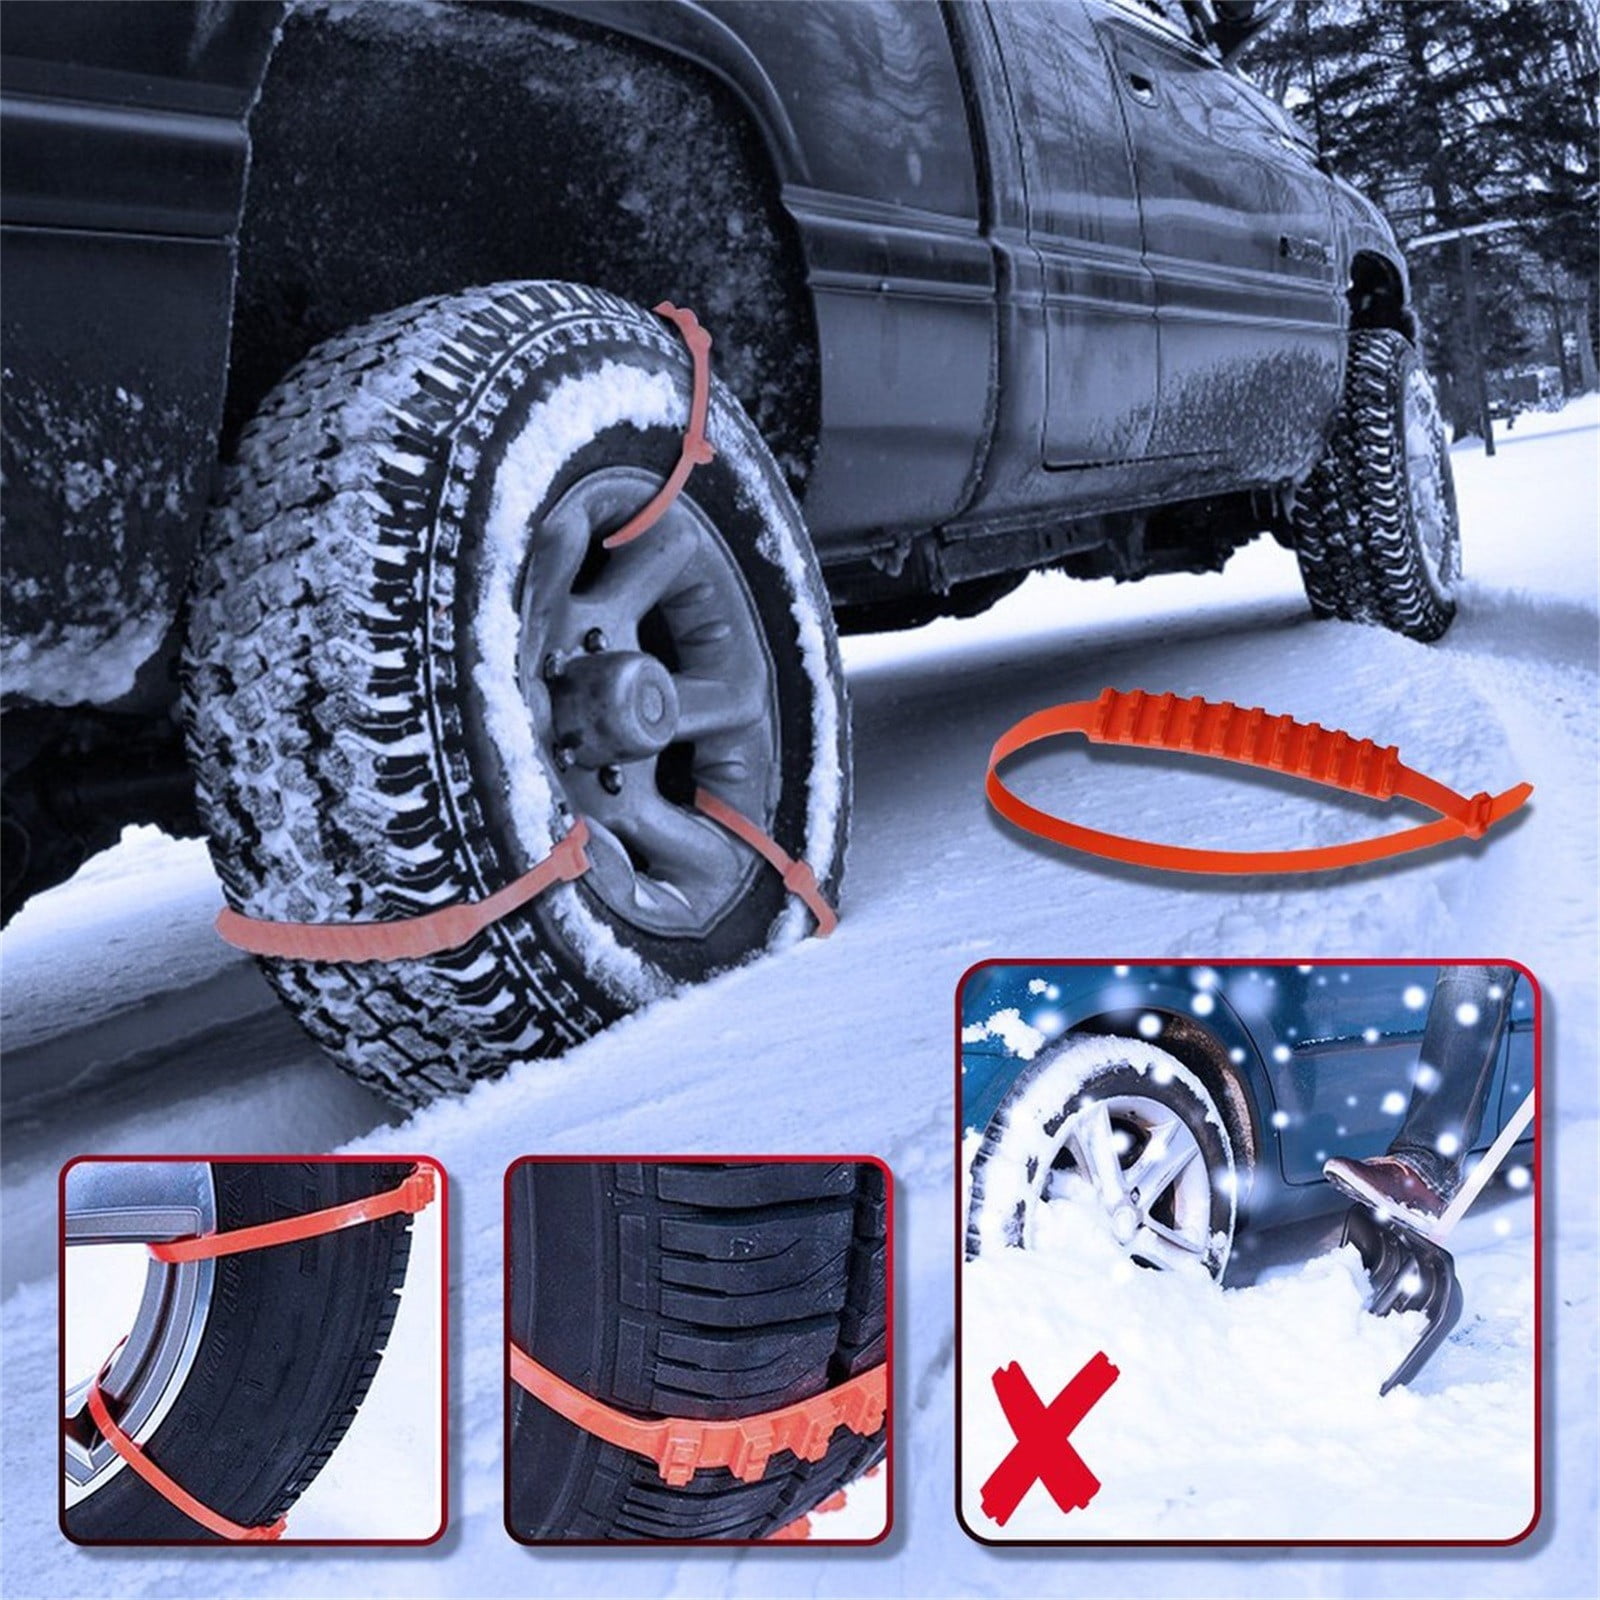 Tire Anti Skid Chains,20pcs Car Truck Anti-skid Nylon Tyre Chains Snow Mud Car Security Tire Belt Cable W/Gloves 